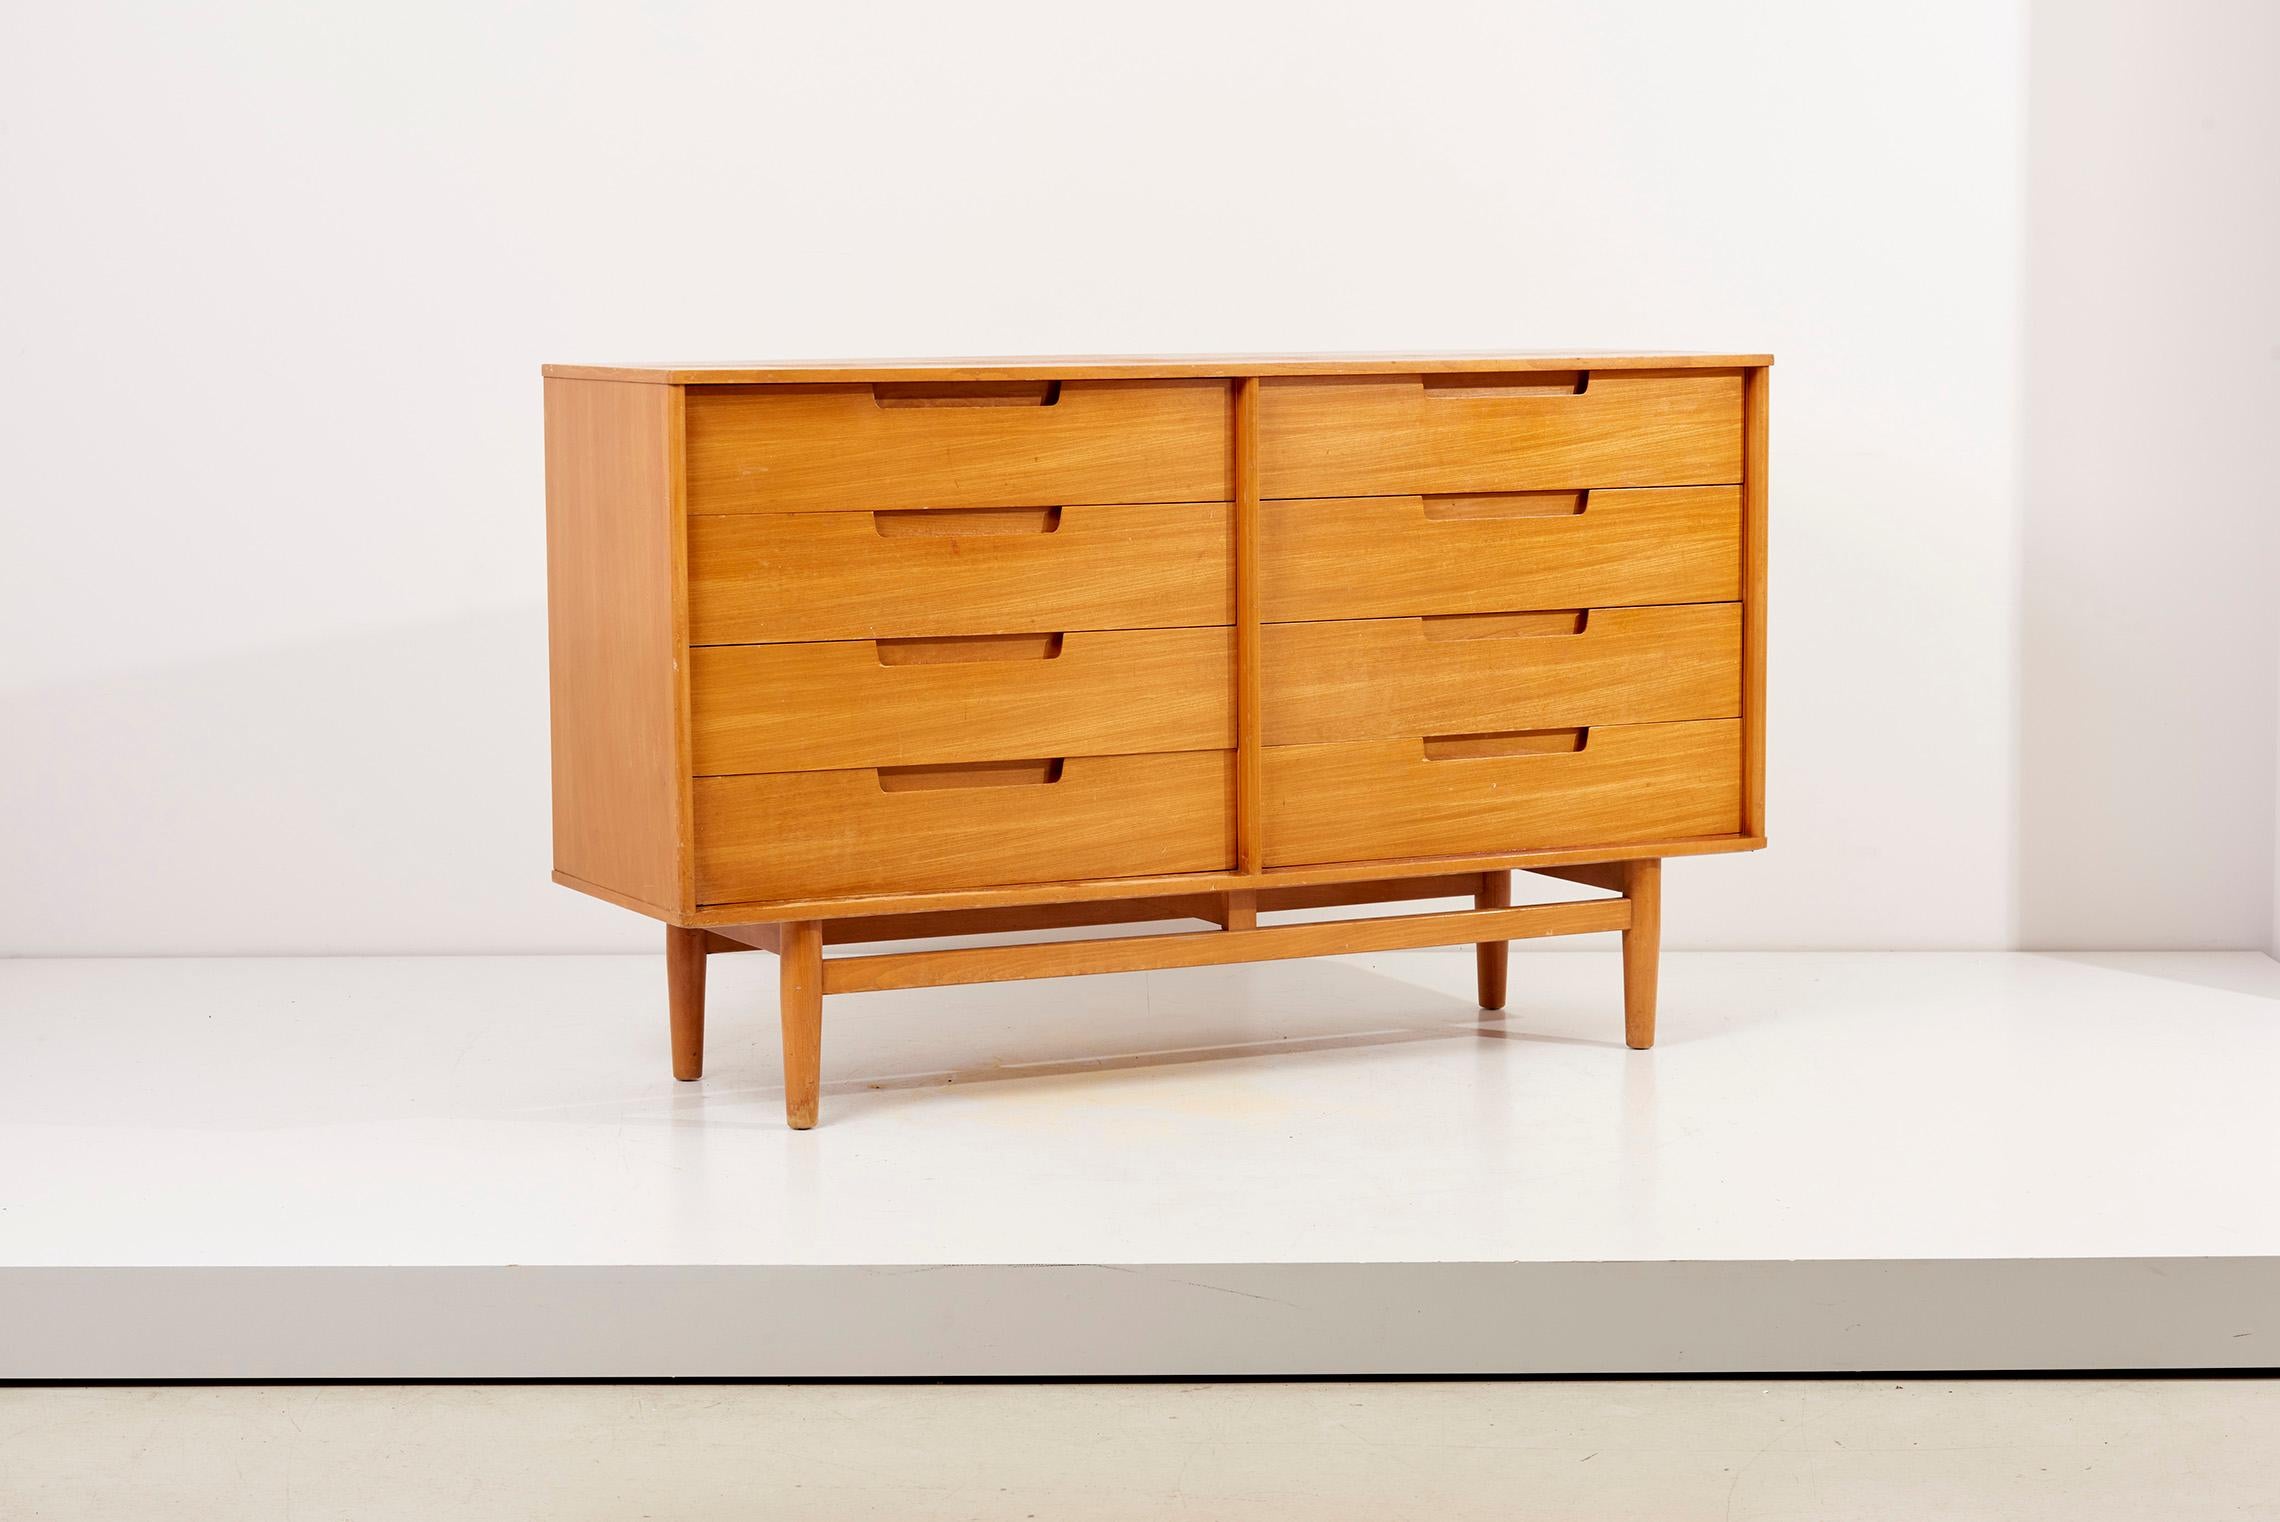 Matched pair of Milo Baughman dressers for Drexel, USA, 1950s
Both pieces have the same veneer and are in very good condition. Signed!
Credenza: 48 wide x 18 deep x 30 high
High Dresser: 32 wide x 18 deep x 46.5 high.